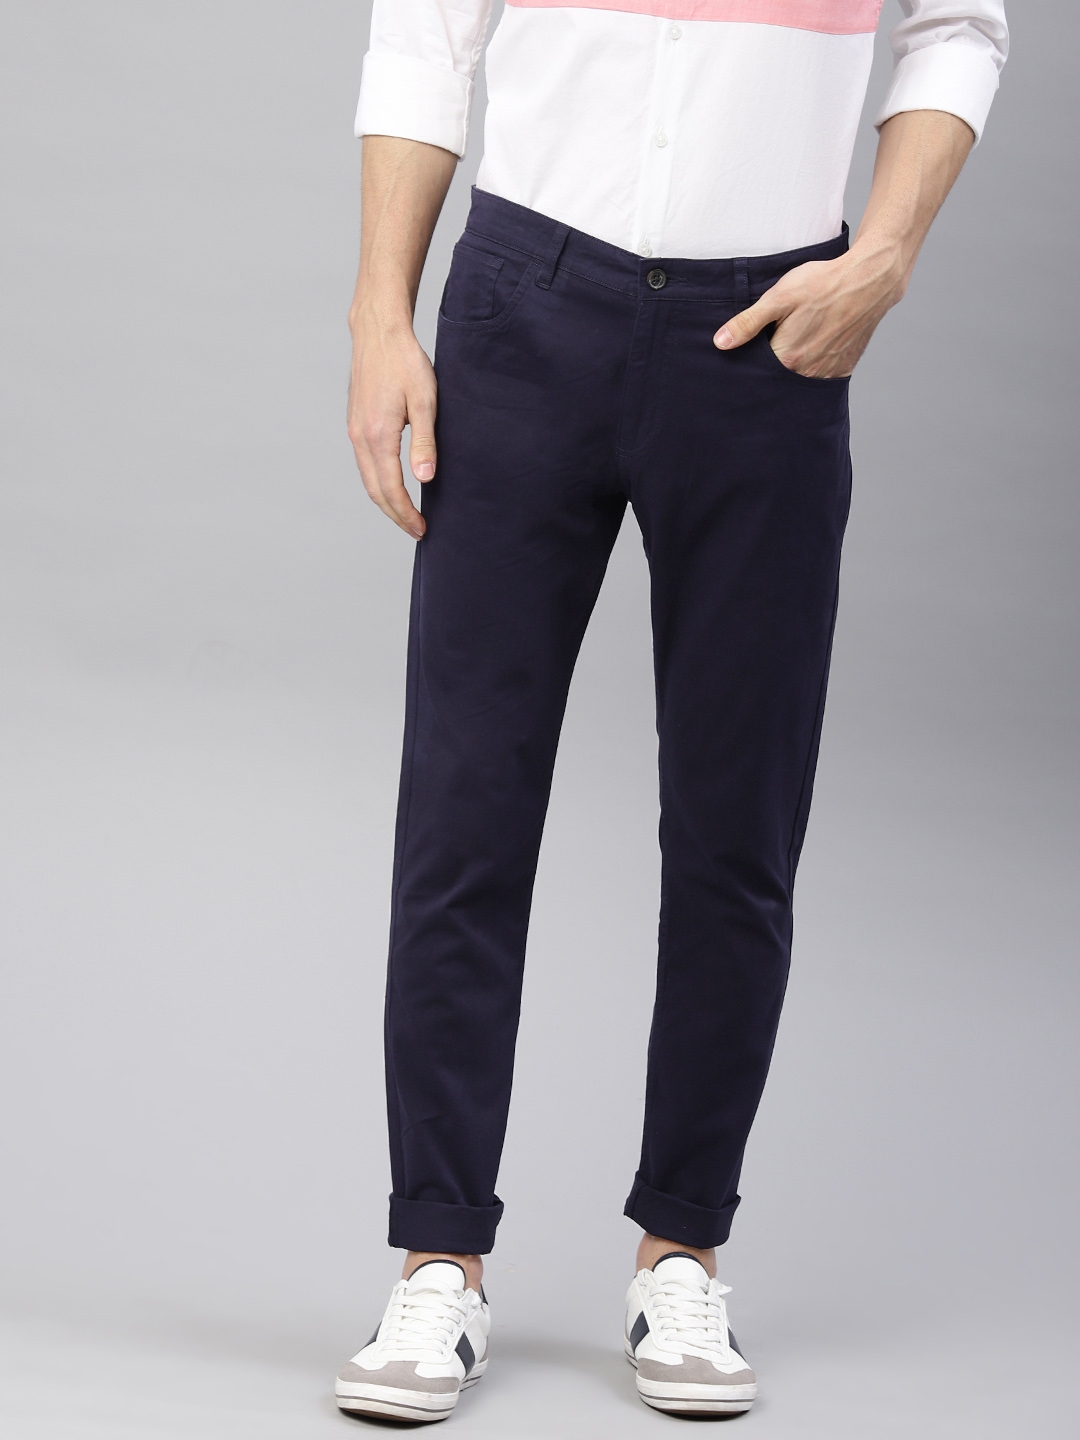 Buy French Connection Men Navy Blue Slim Fit Solid Chinos - Trousers ...